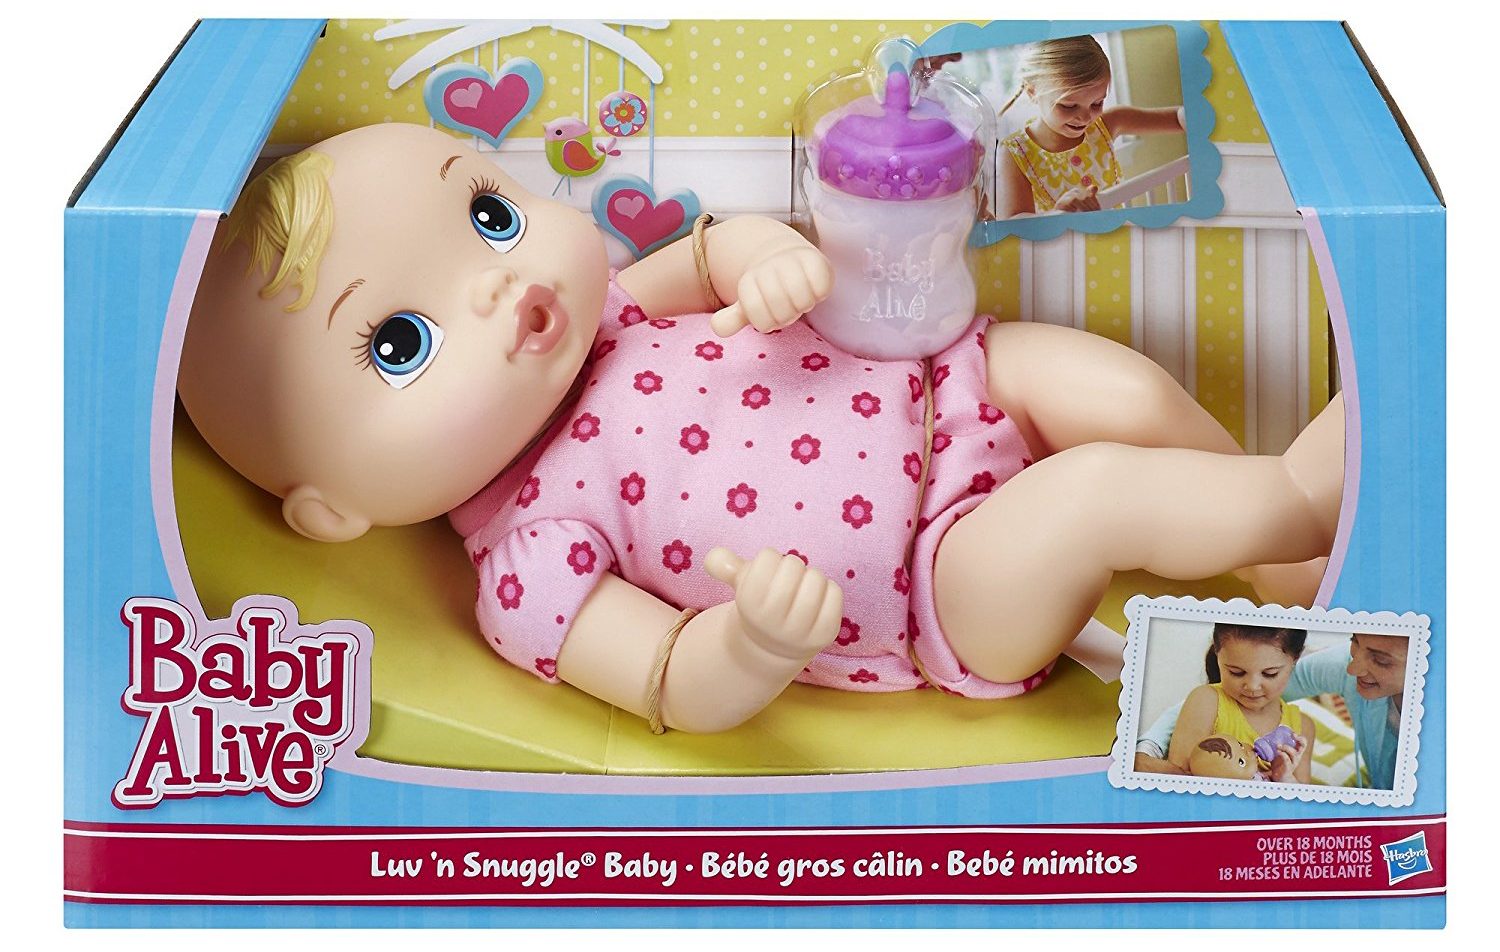 Baby Alive Luv 'n Snuggle Blond Baby Doll $8.99!! $39.99) - Sense With Money